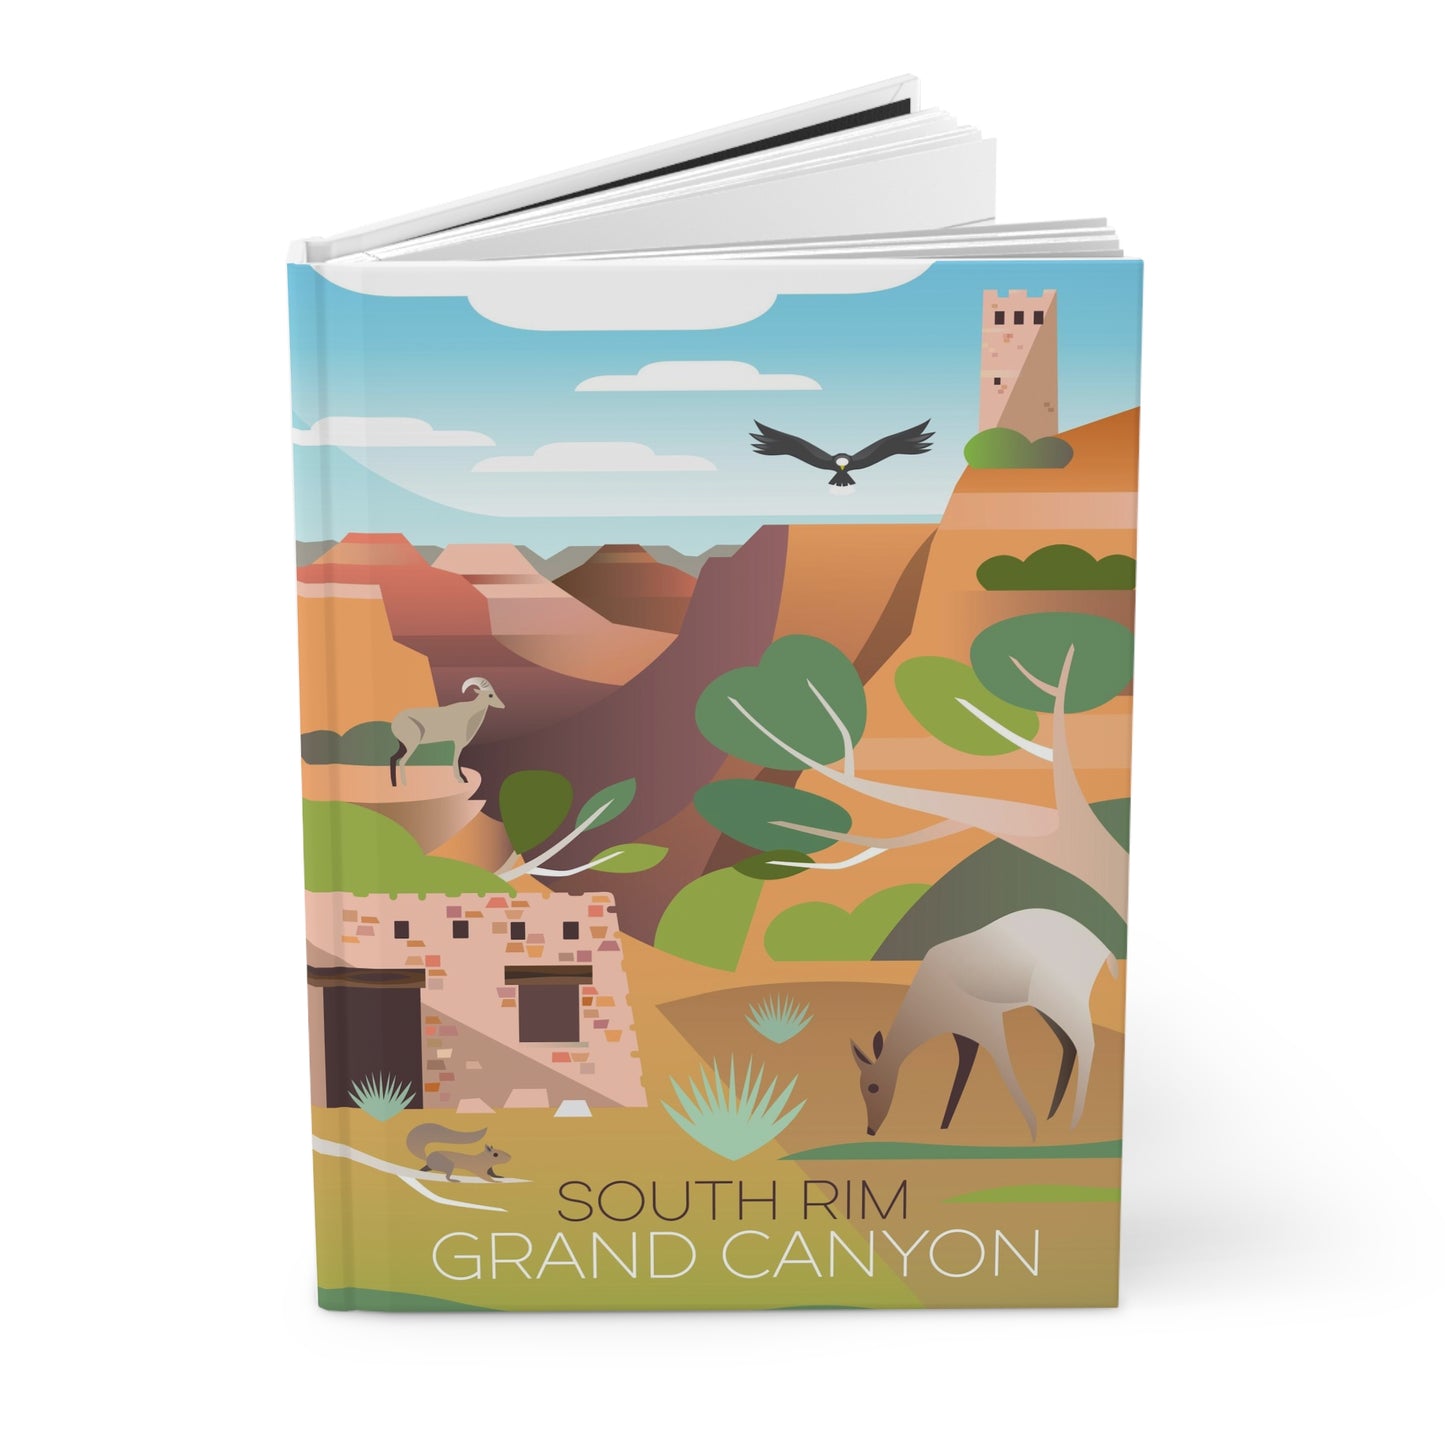 Grand Canyon National Park, South Rim Hardcover Journal